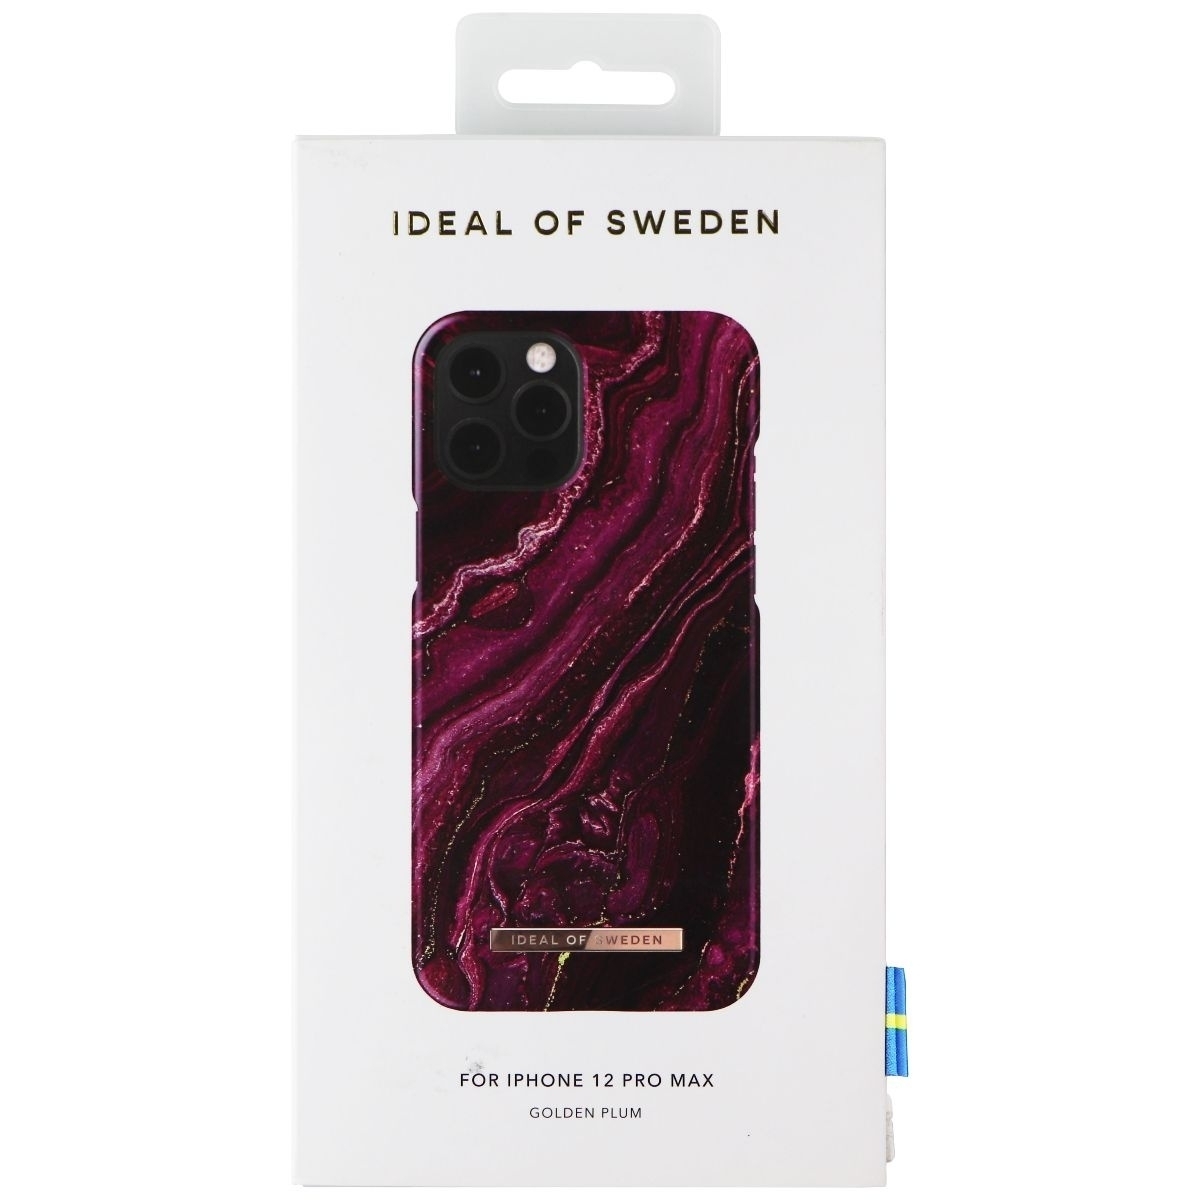 IDeal Of Sweden Hard Case For Apple IPhone 12 Pro Max - Golden Plum